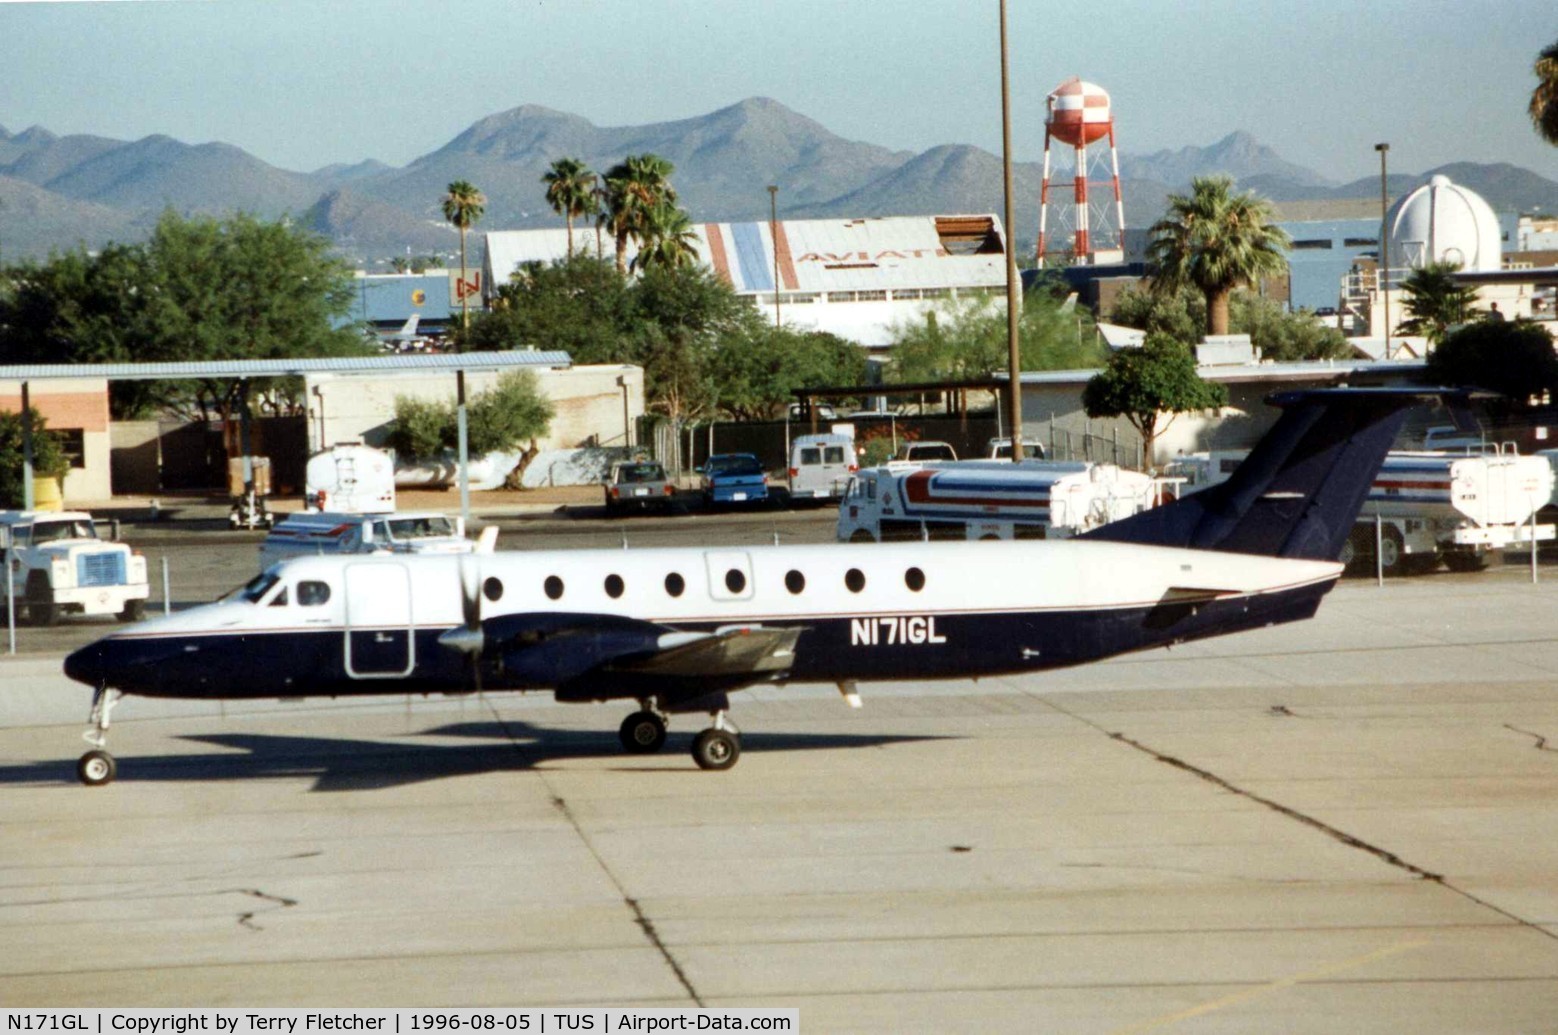 N171GL, 1991 Beech 1900C-1 C/N UC-171, Great Lakes B1900C c/n UC-171 seen here at Tuscon